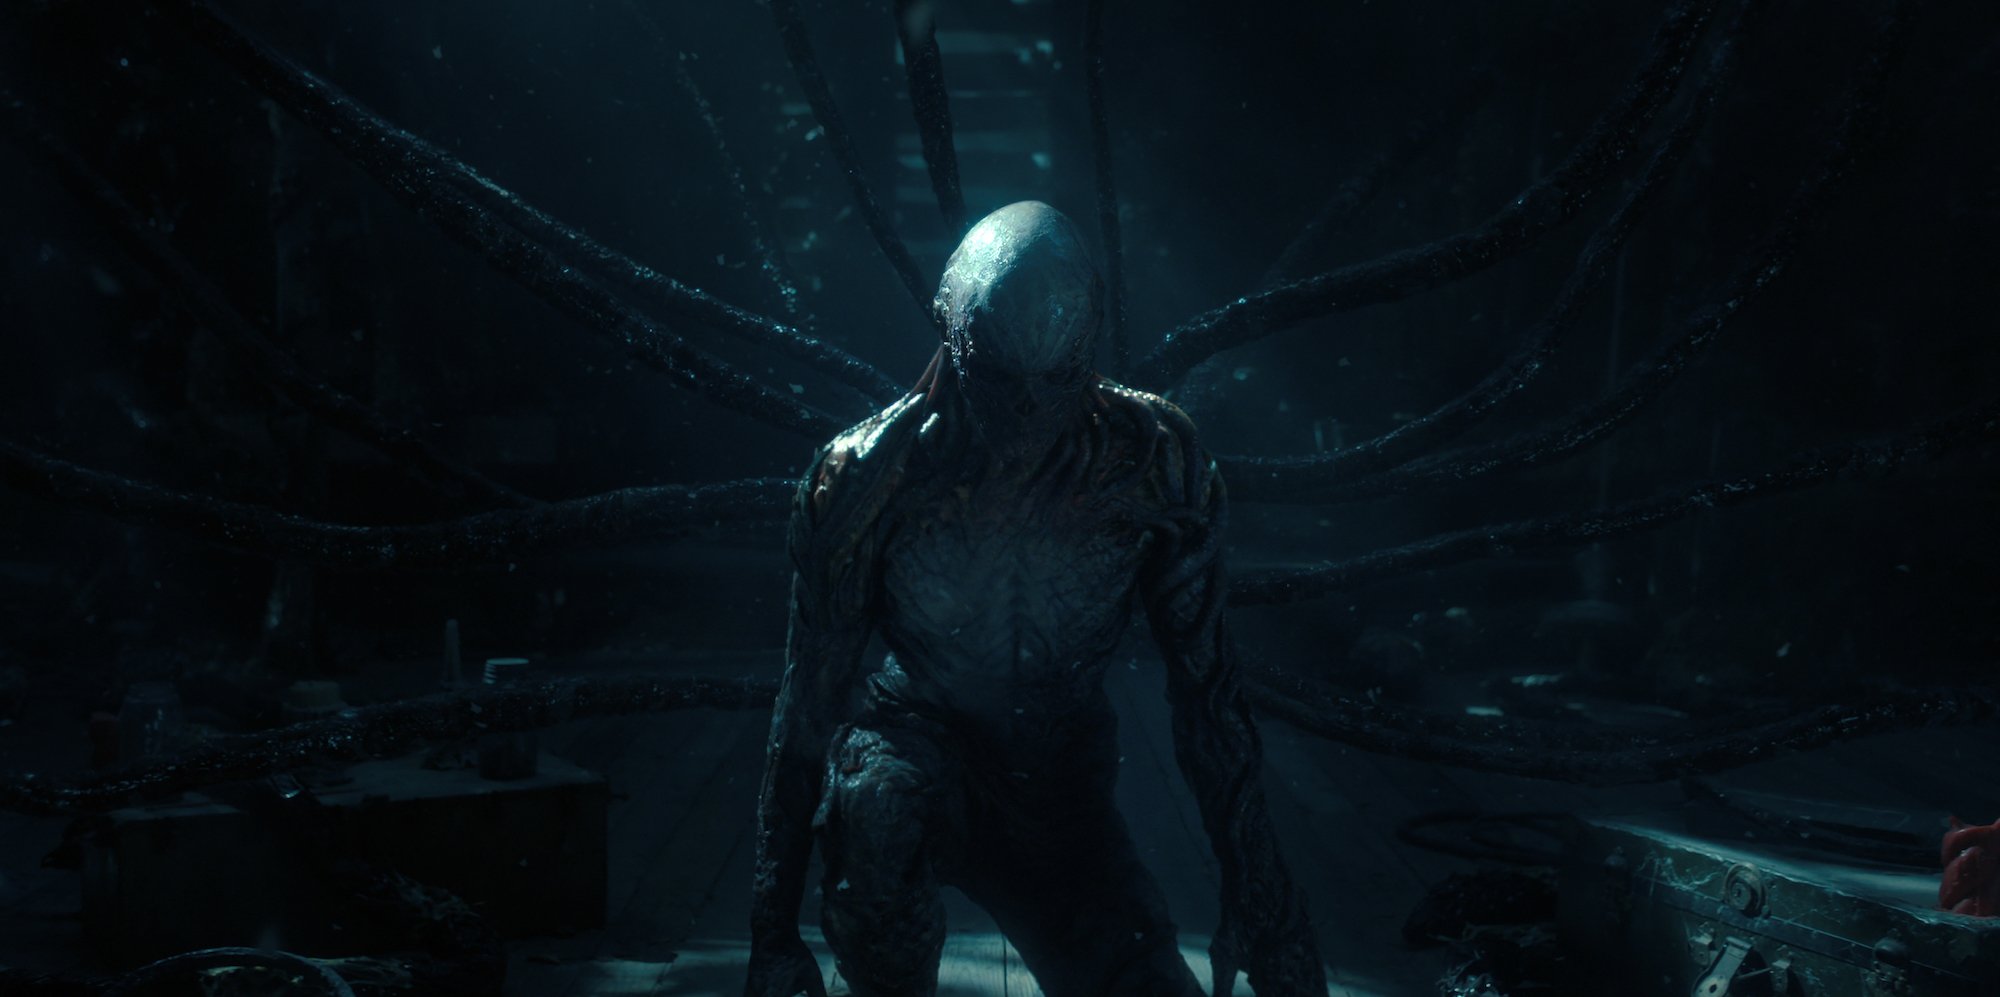 'Stranger Things 4' villain Vecna's identity is a big question for fans. Here's Vecna in a production still from the new season.